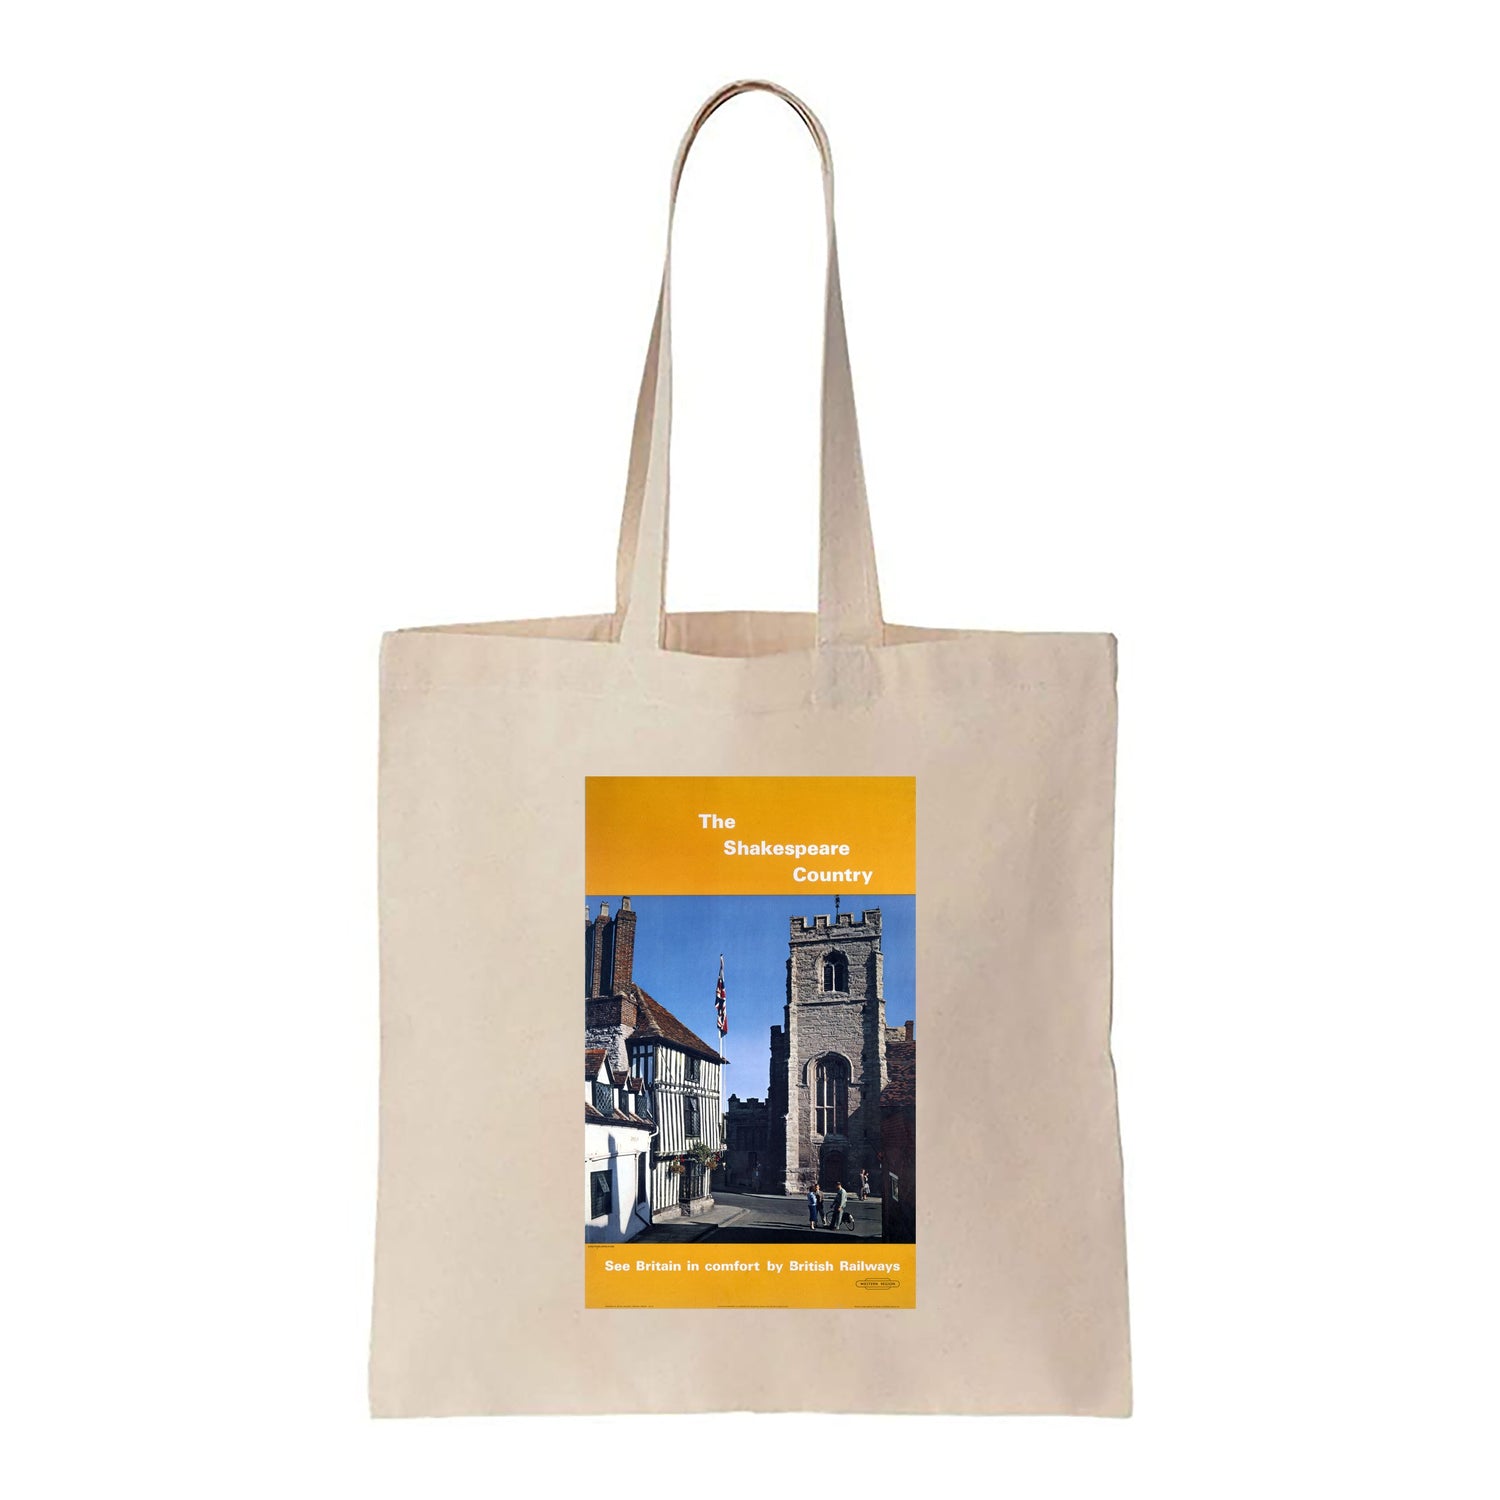 The Shakespeare Country - See Britain In Comfort - Canvas Tote Bag